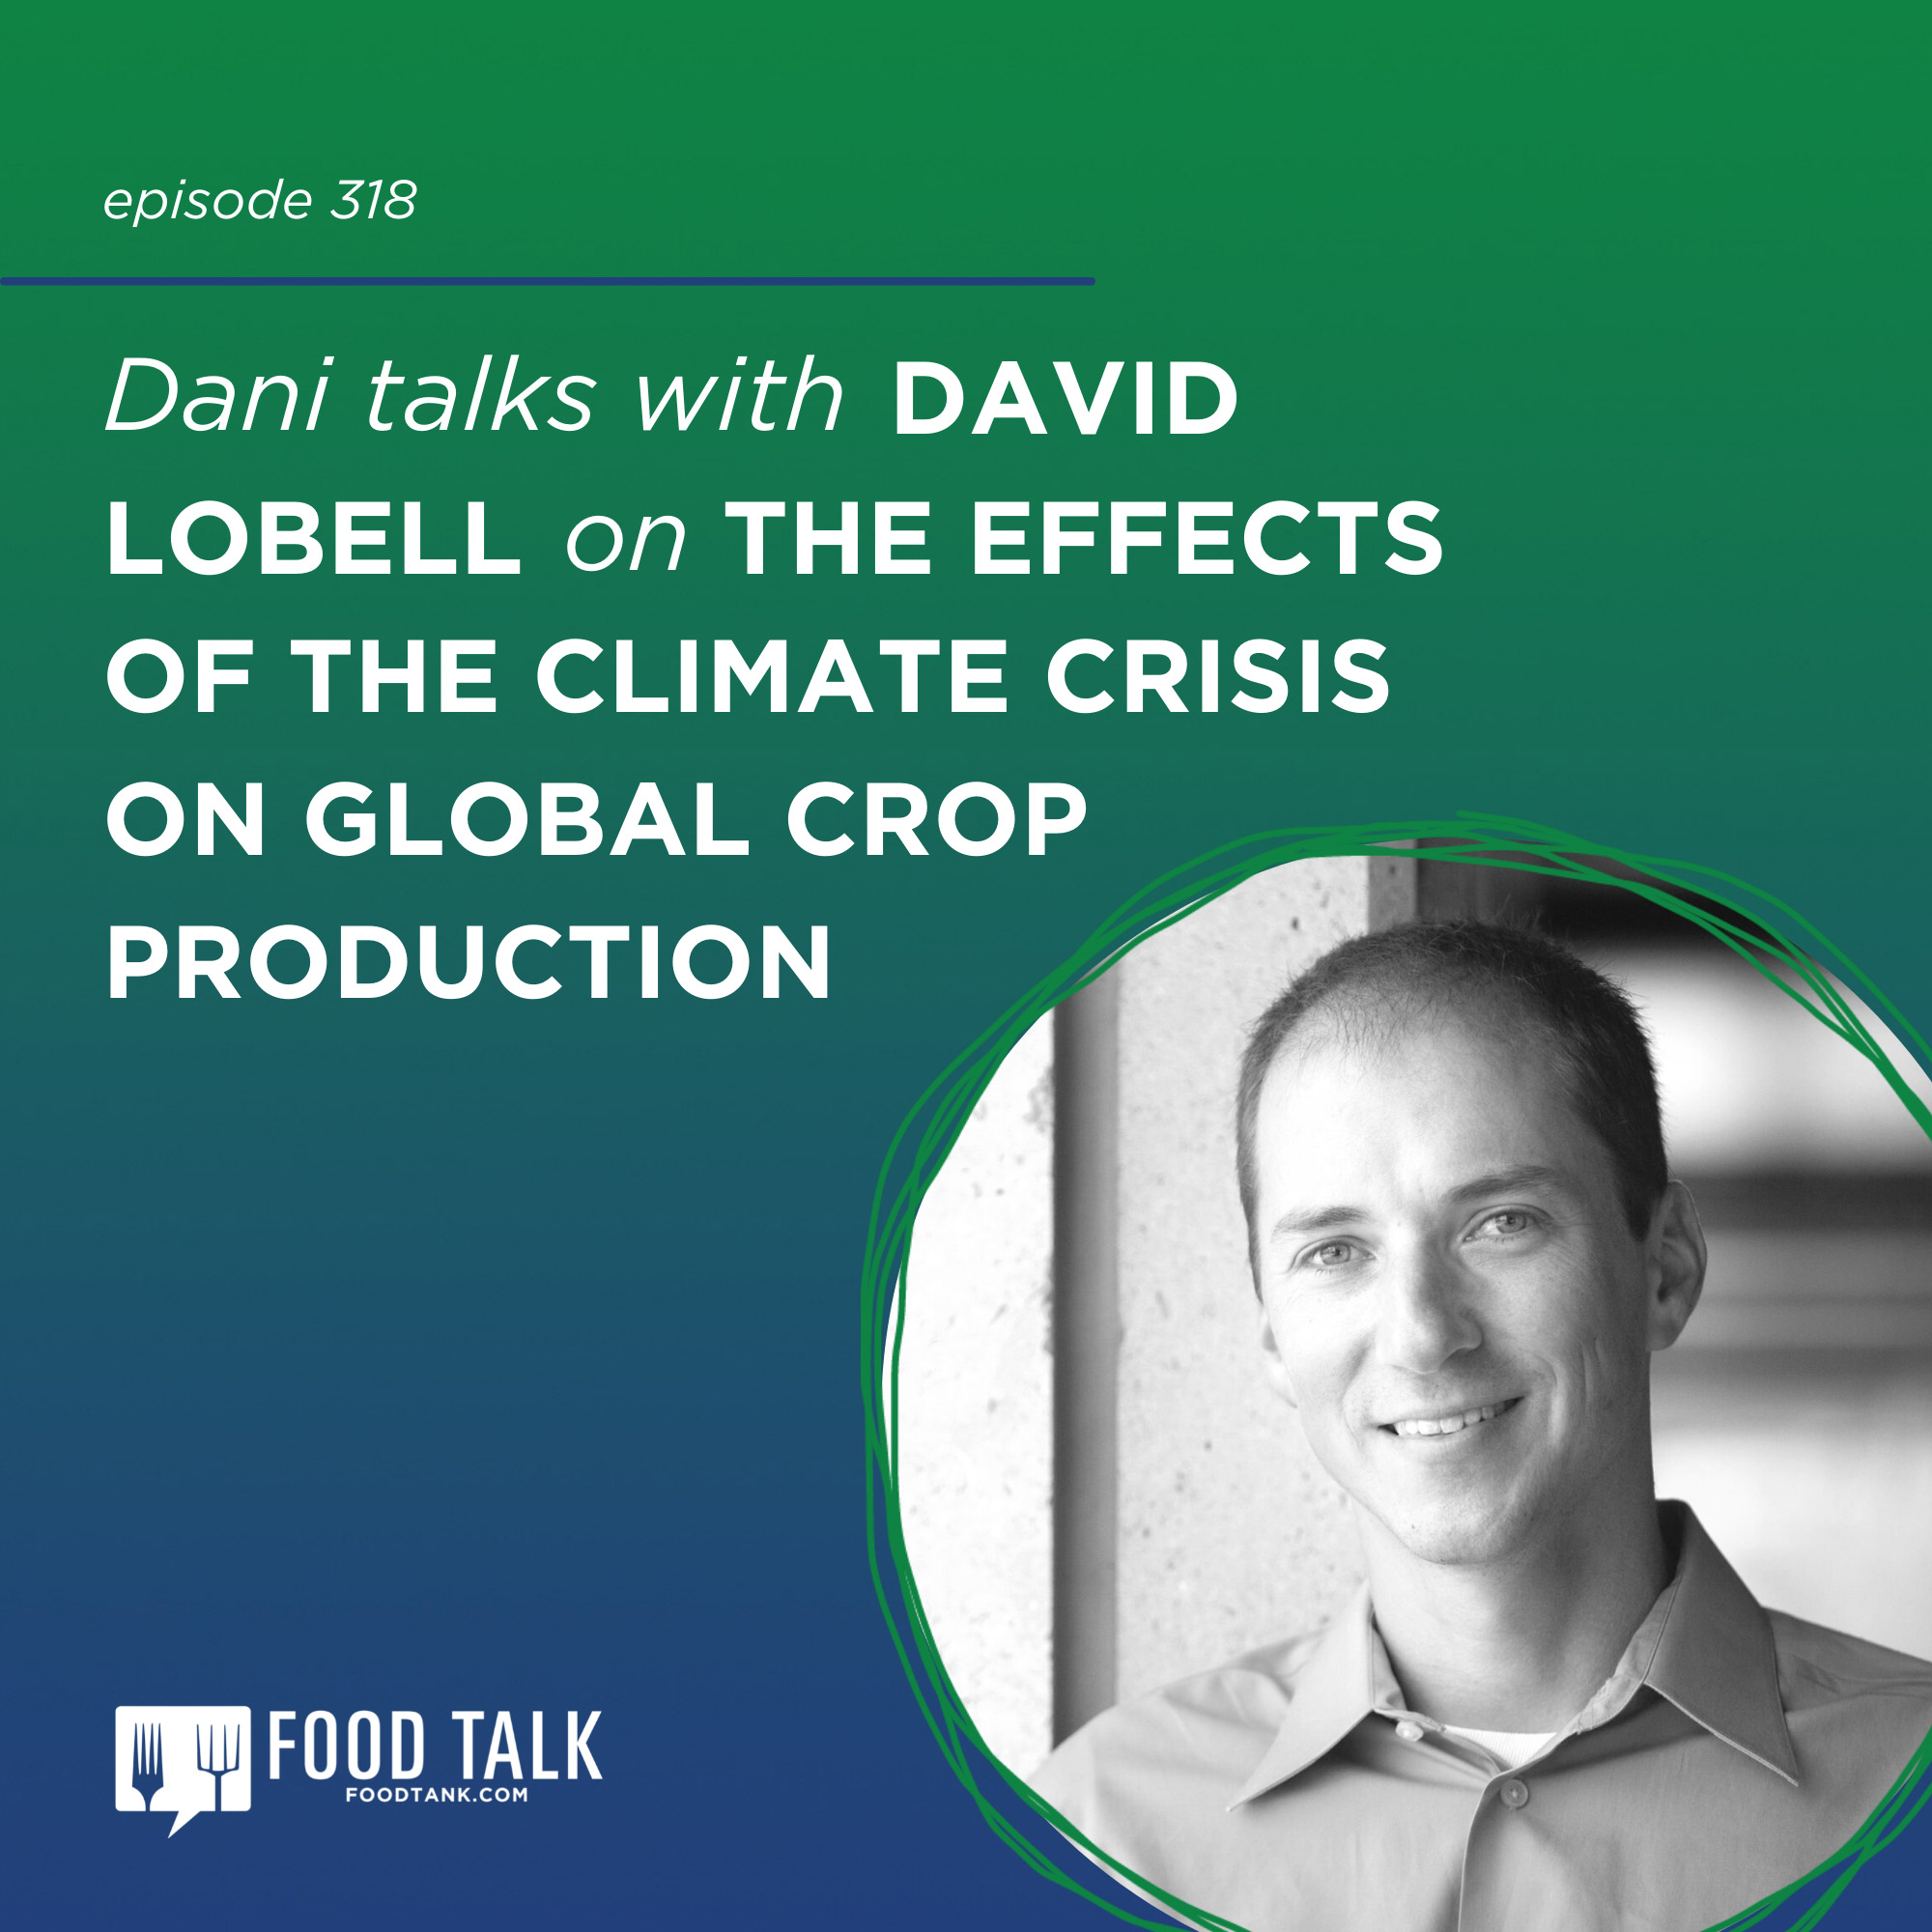 https://podcasts.apple.com/us/podcast/318-david-lobell-on-the-effects-of-the-climate/id1434128568?i=1000558233896